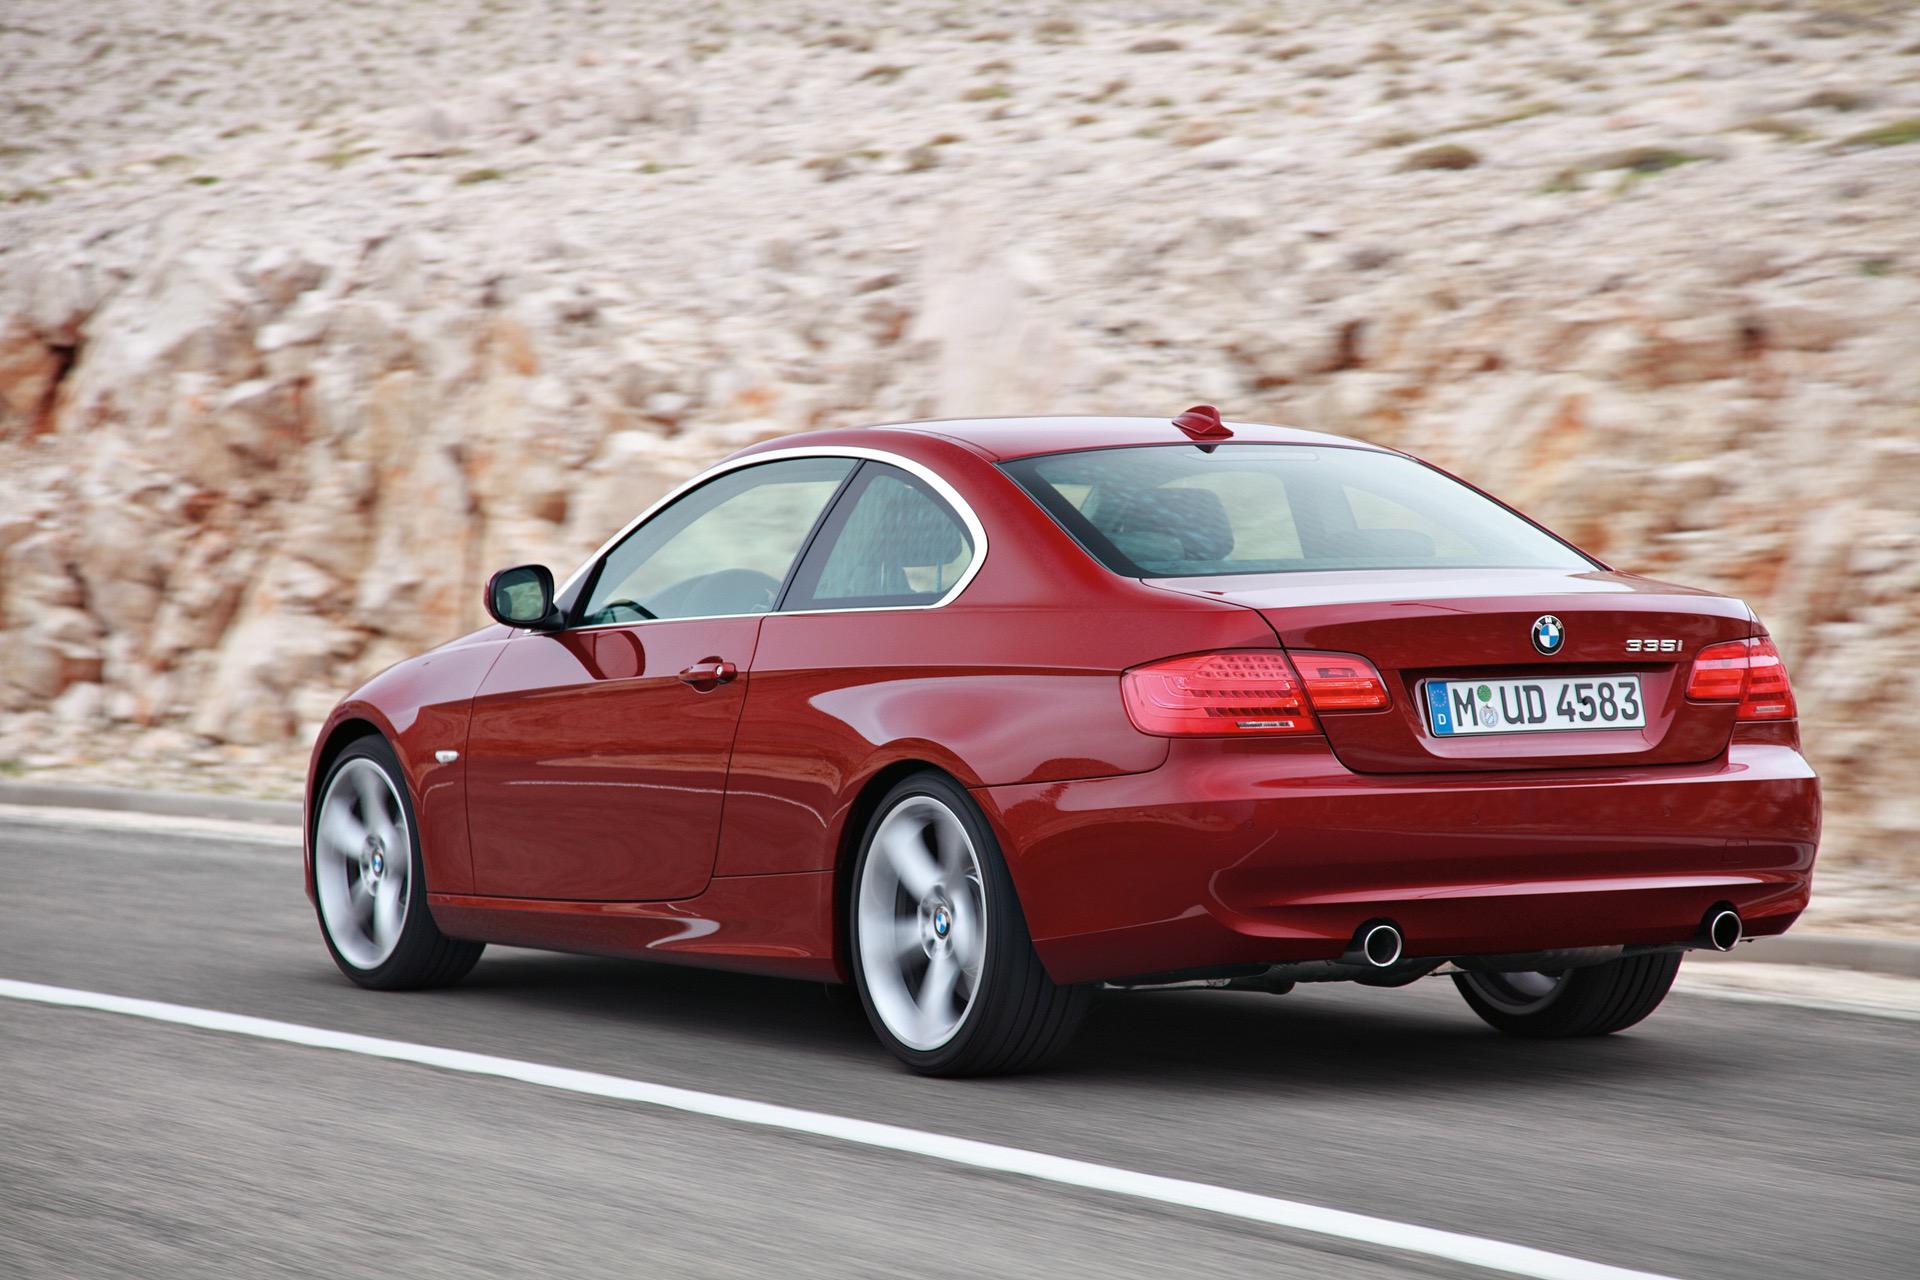 BMW E92 3 Series Buying Guide Which Model Should I Buy?